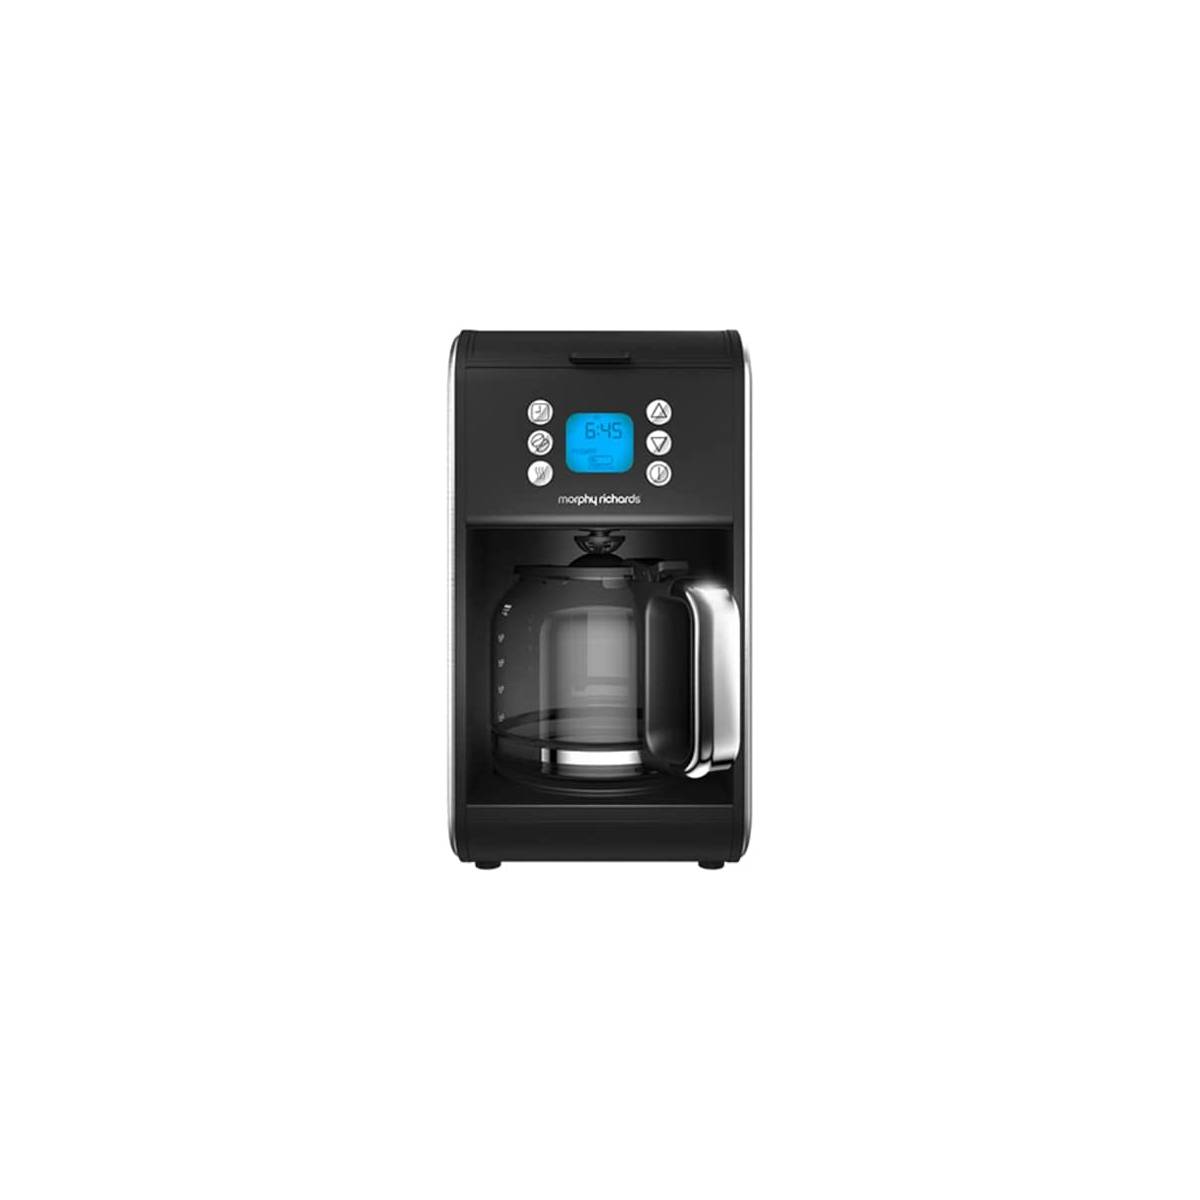 Morphy richards brewmaster coffee maker - Kitchen & Other Appliances -  1756715362